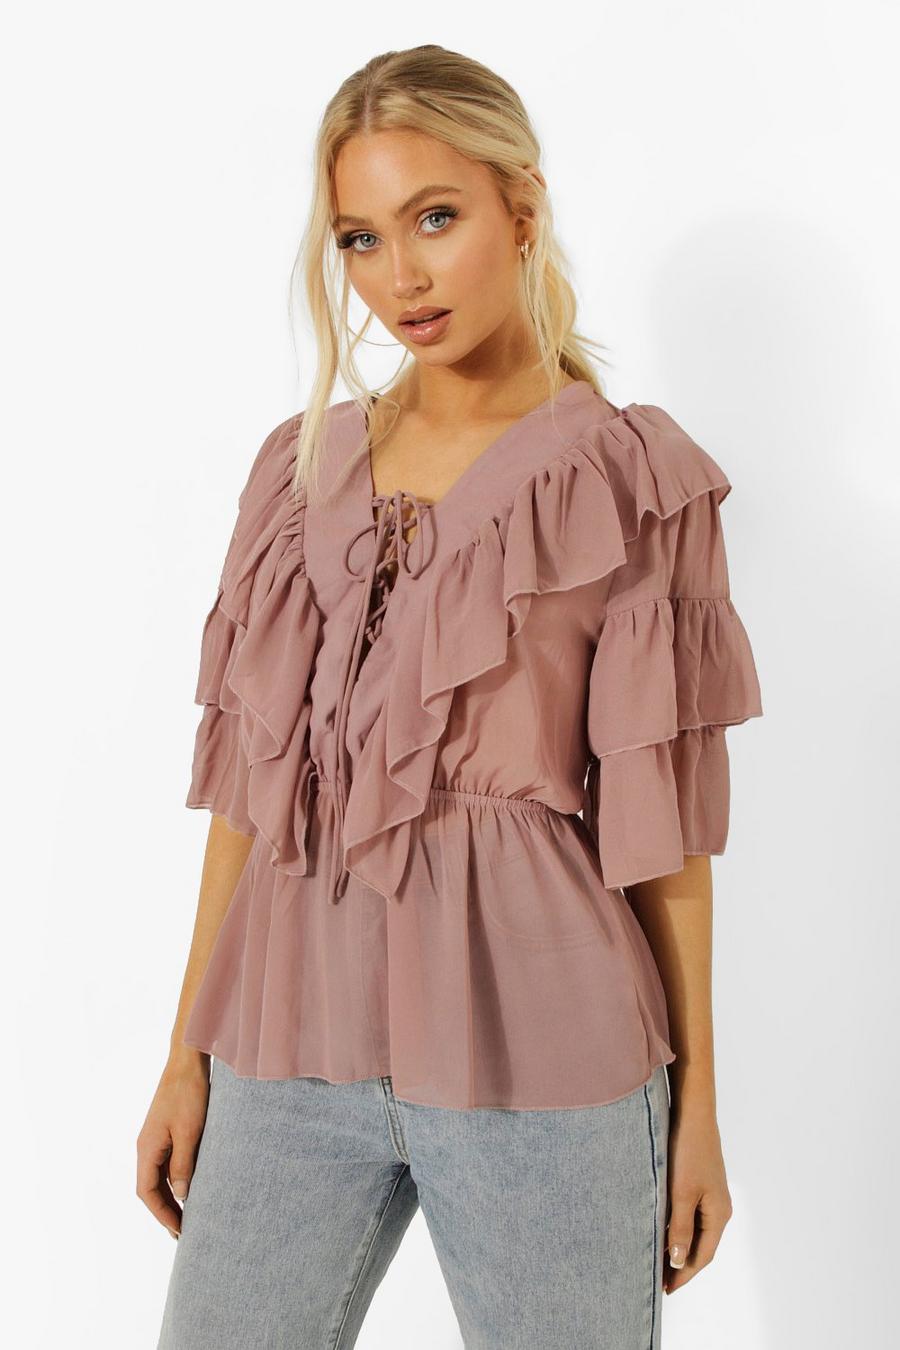 Taupe Woven Ruffle Lace Up Blouse